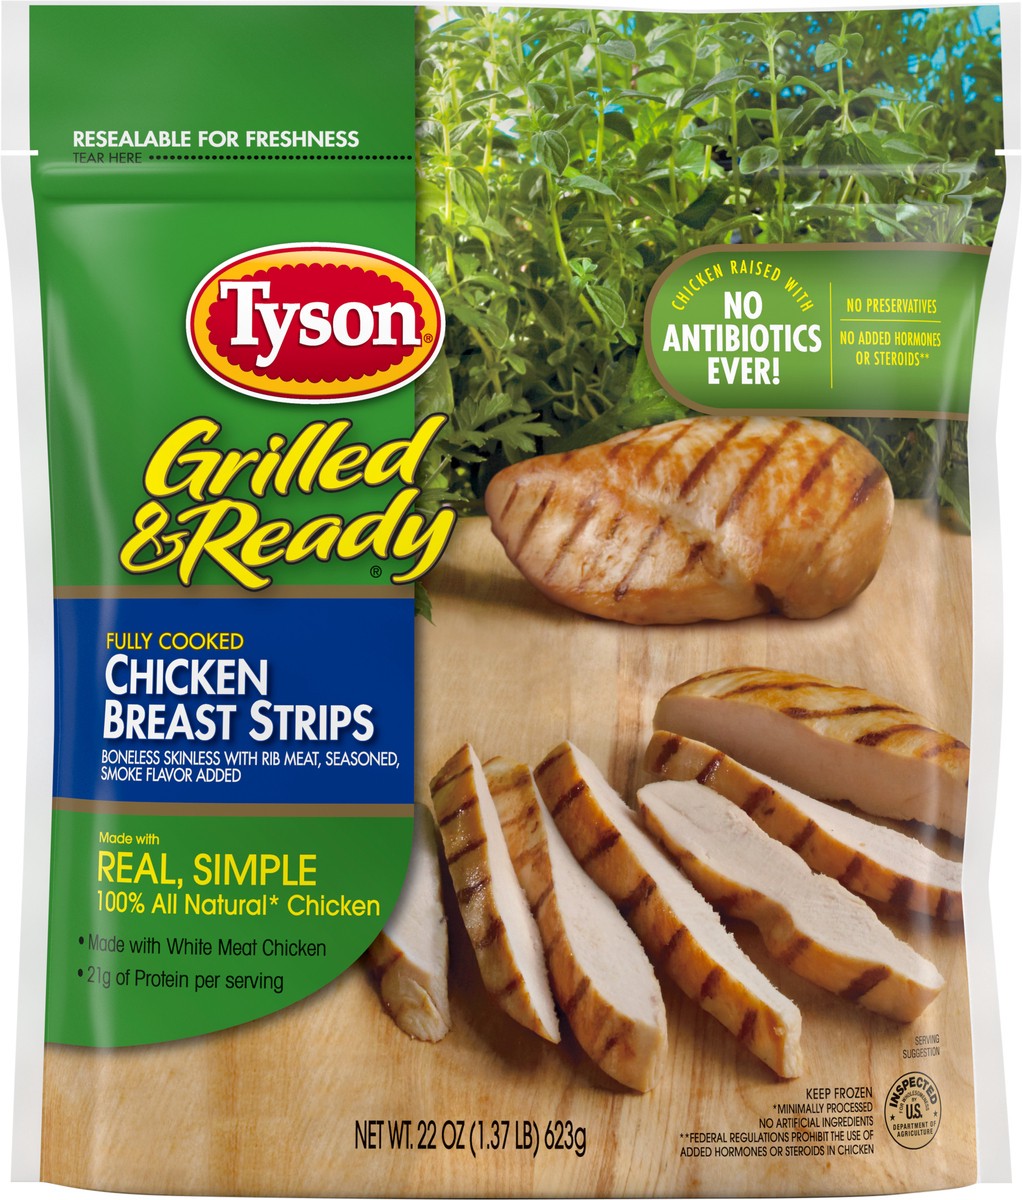 slide 6 of 10, TYSON GRILLED AND READY Tyson Grilled & Ready Fully Cooked Grilled Chicken Breast Strips, 22 oz. (Frozen), 623.69 g